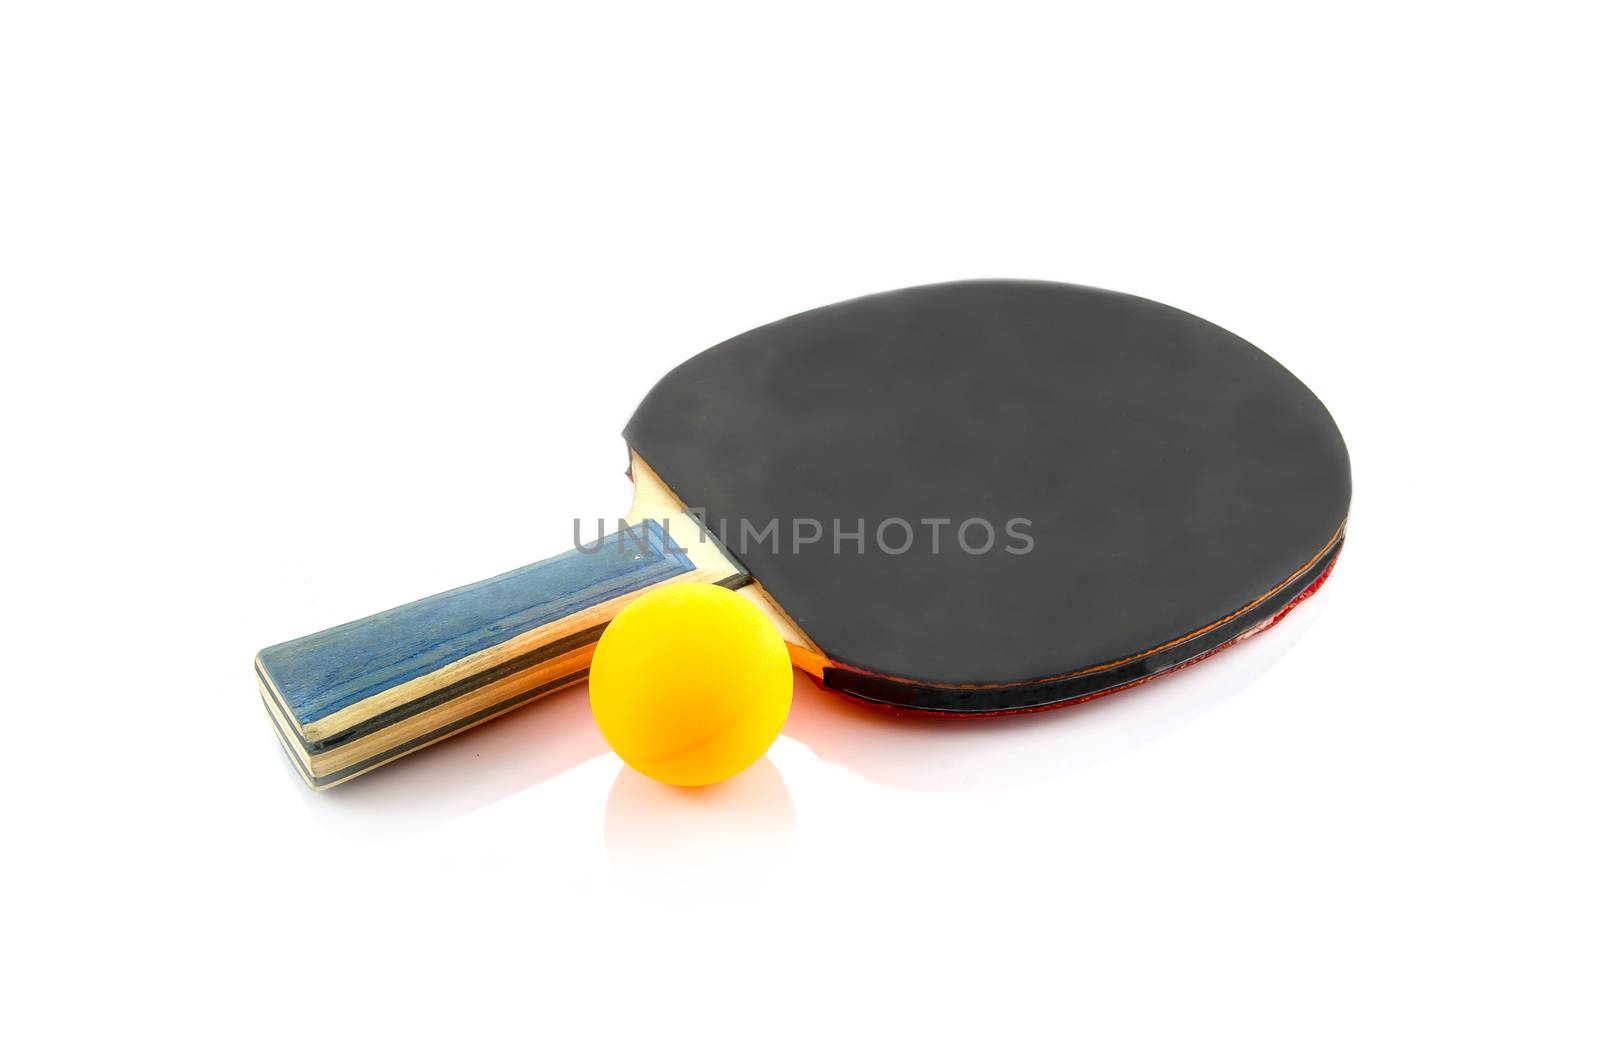 Table tennis and Table tennis ball isolate.